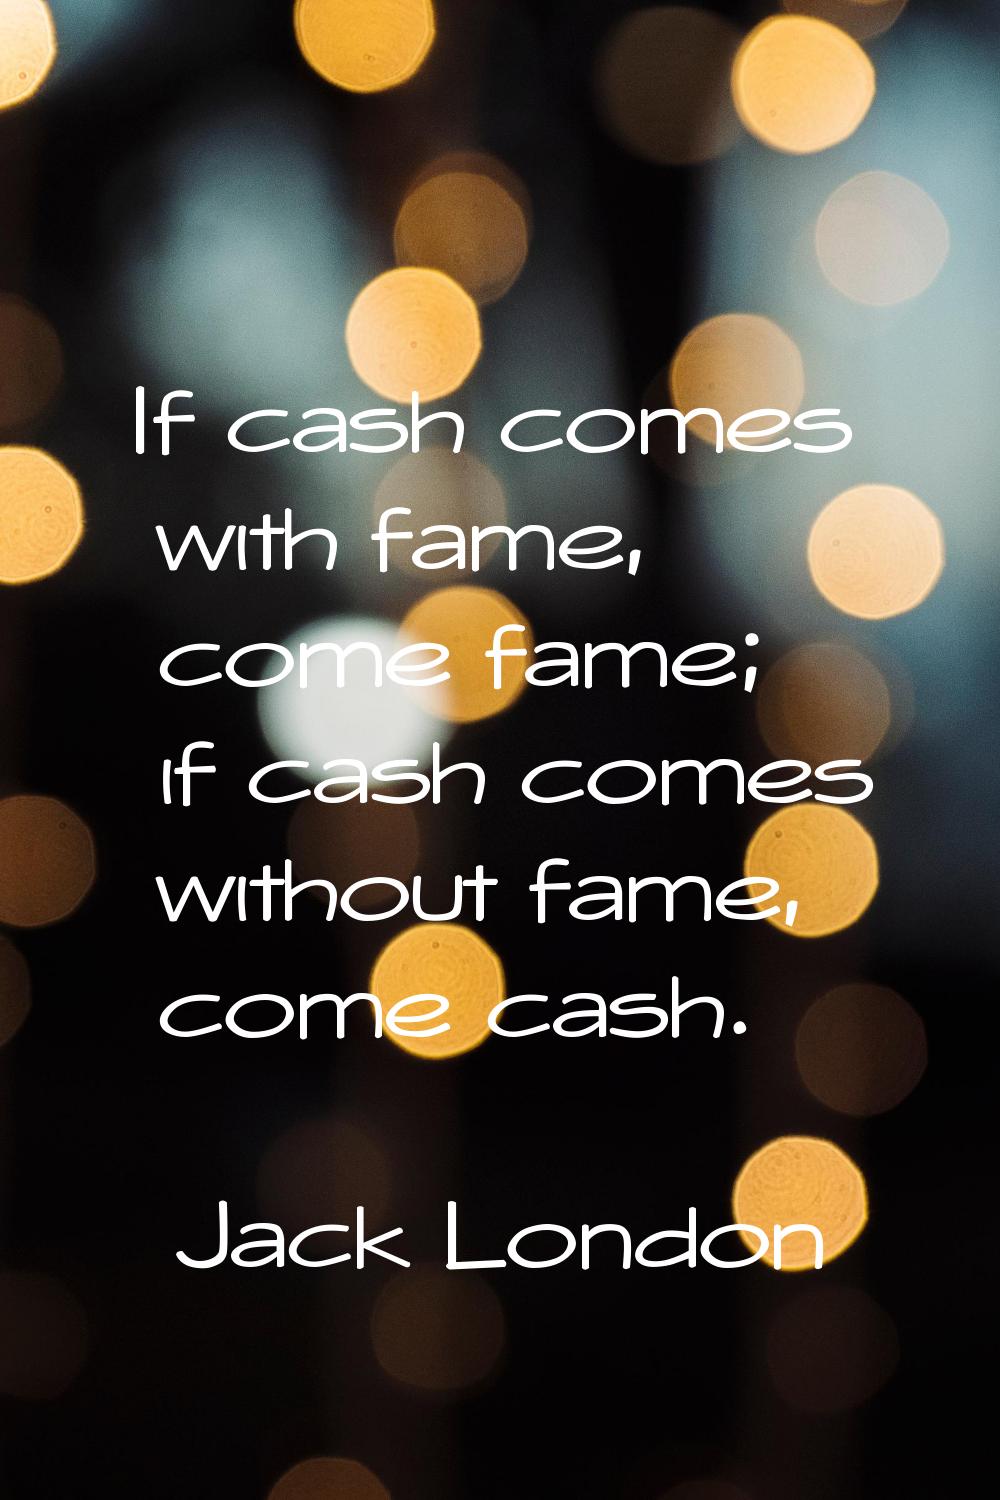 If cash comes with fame, come fame; if cash comes without fame, come cash.